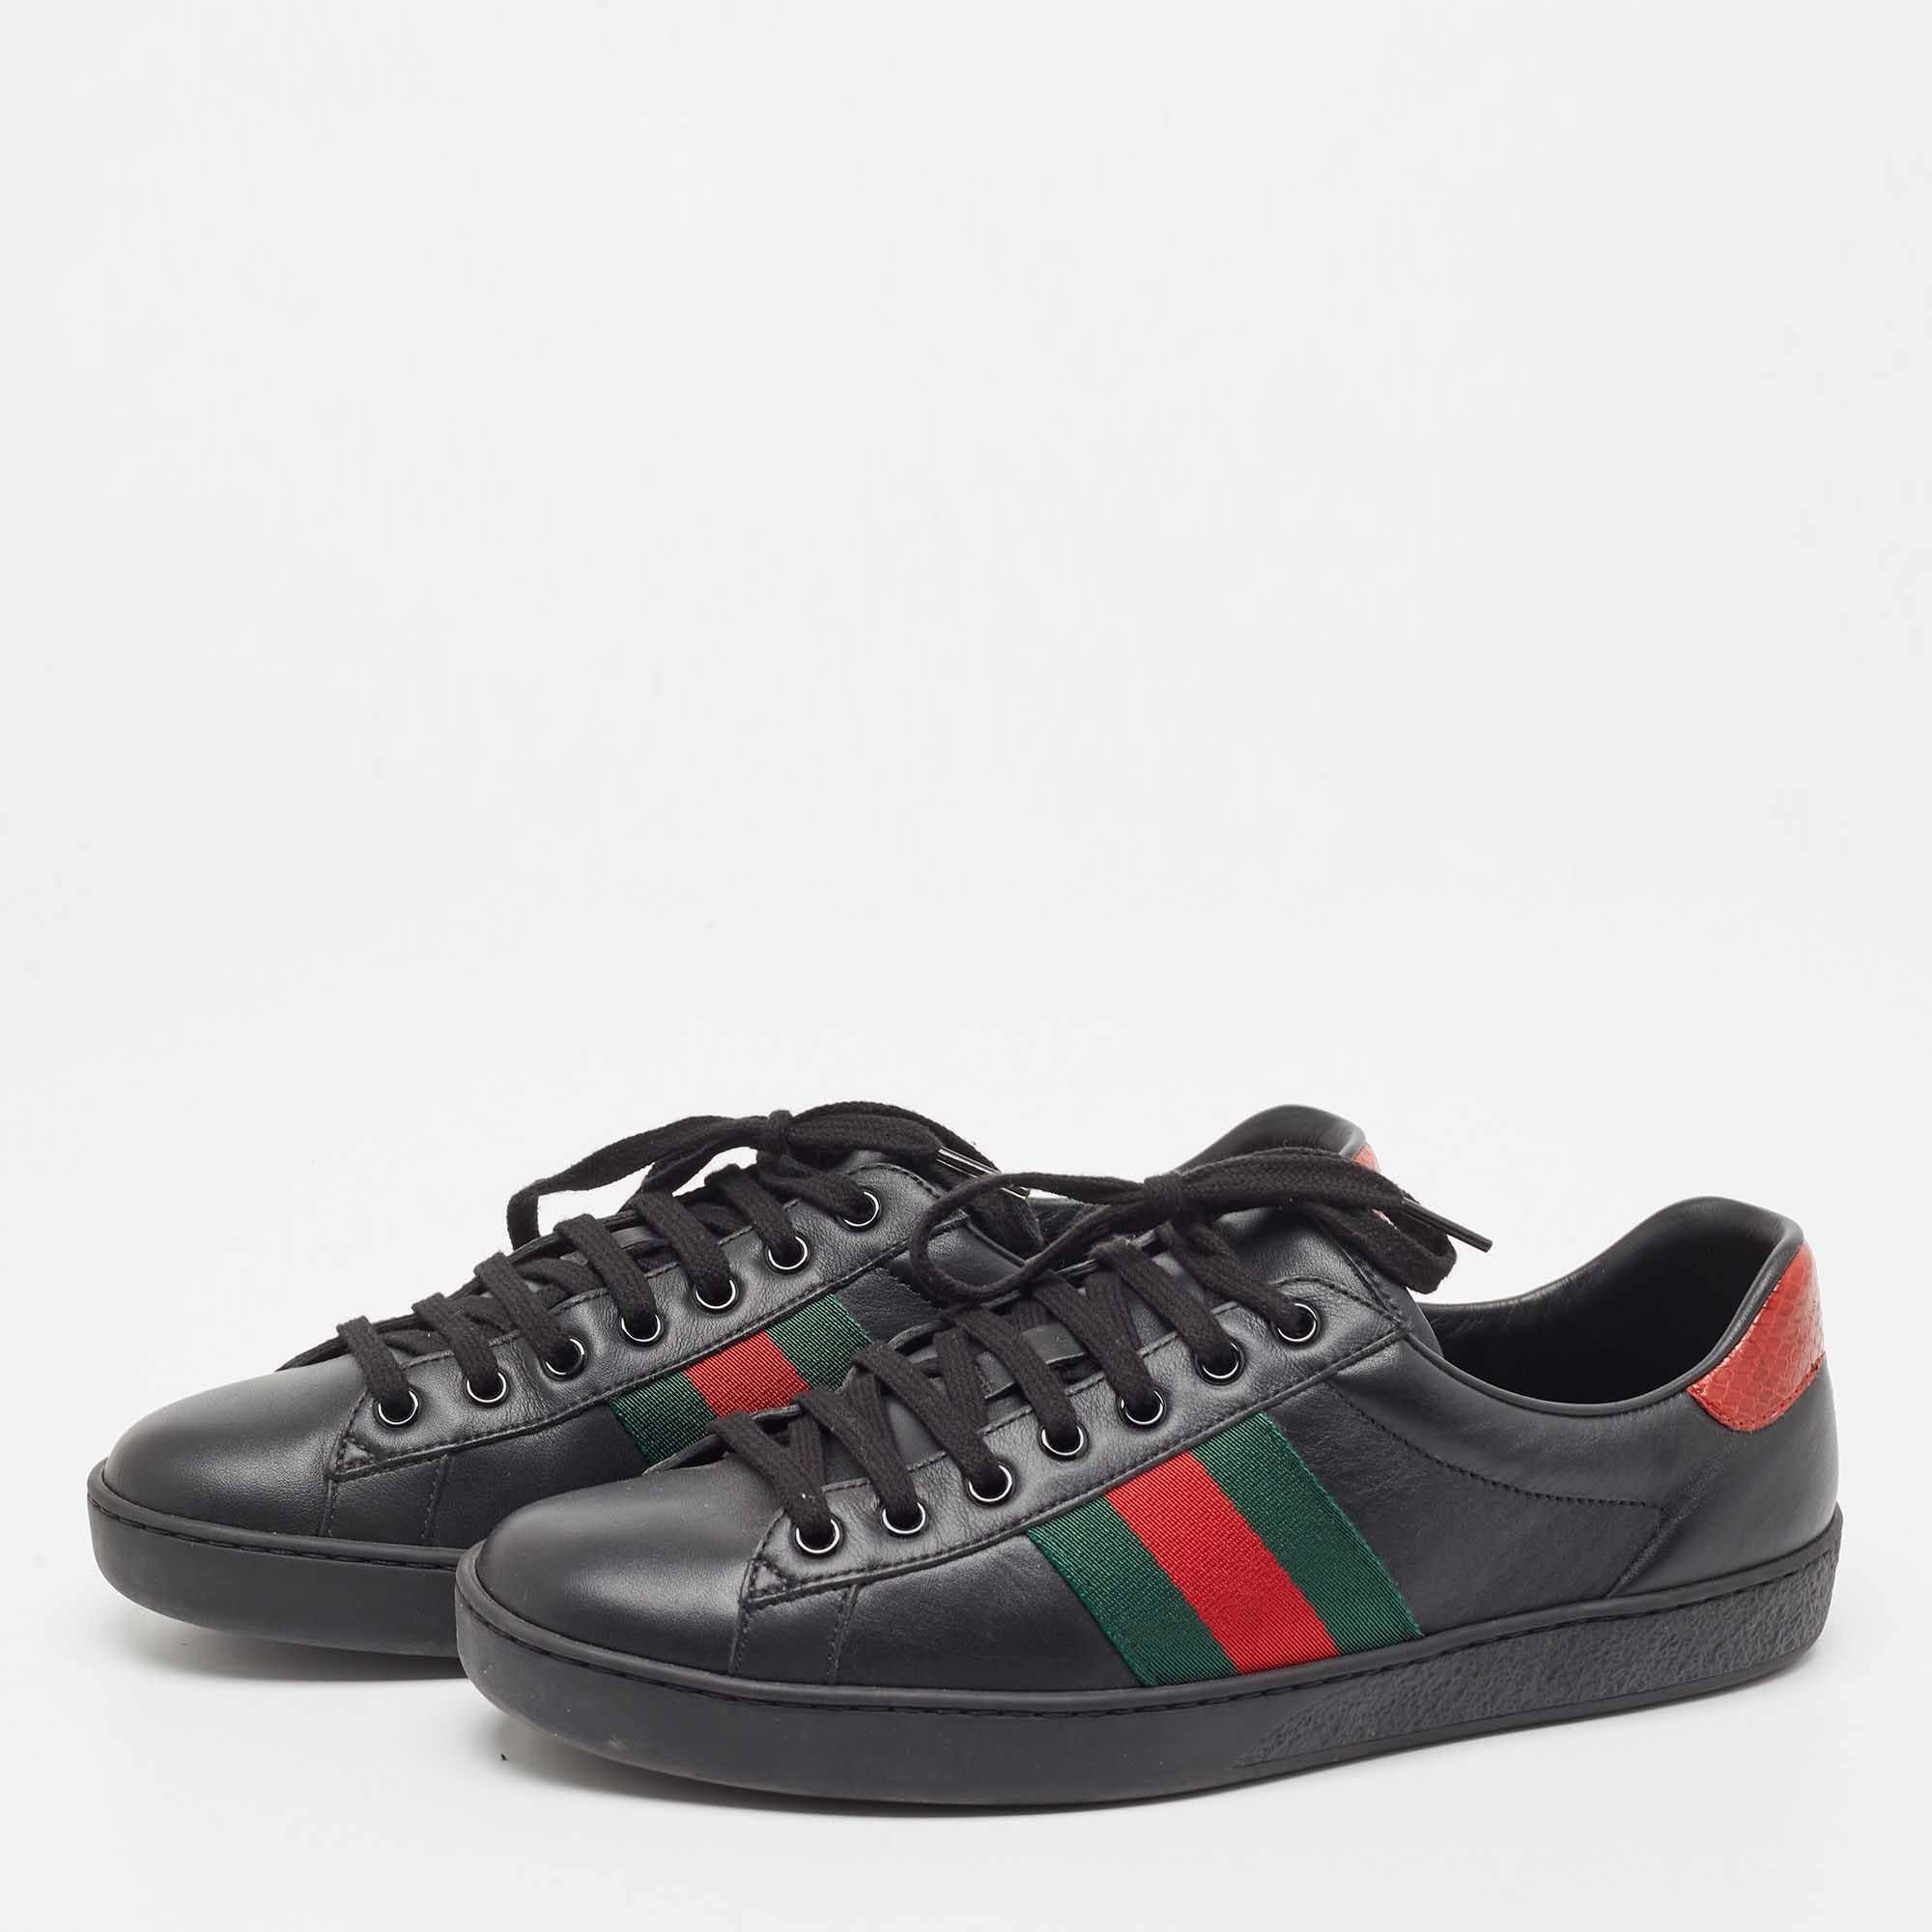 Gucci Black Leather Ace Web Low Top Sneakers Size 41.5 3